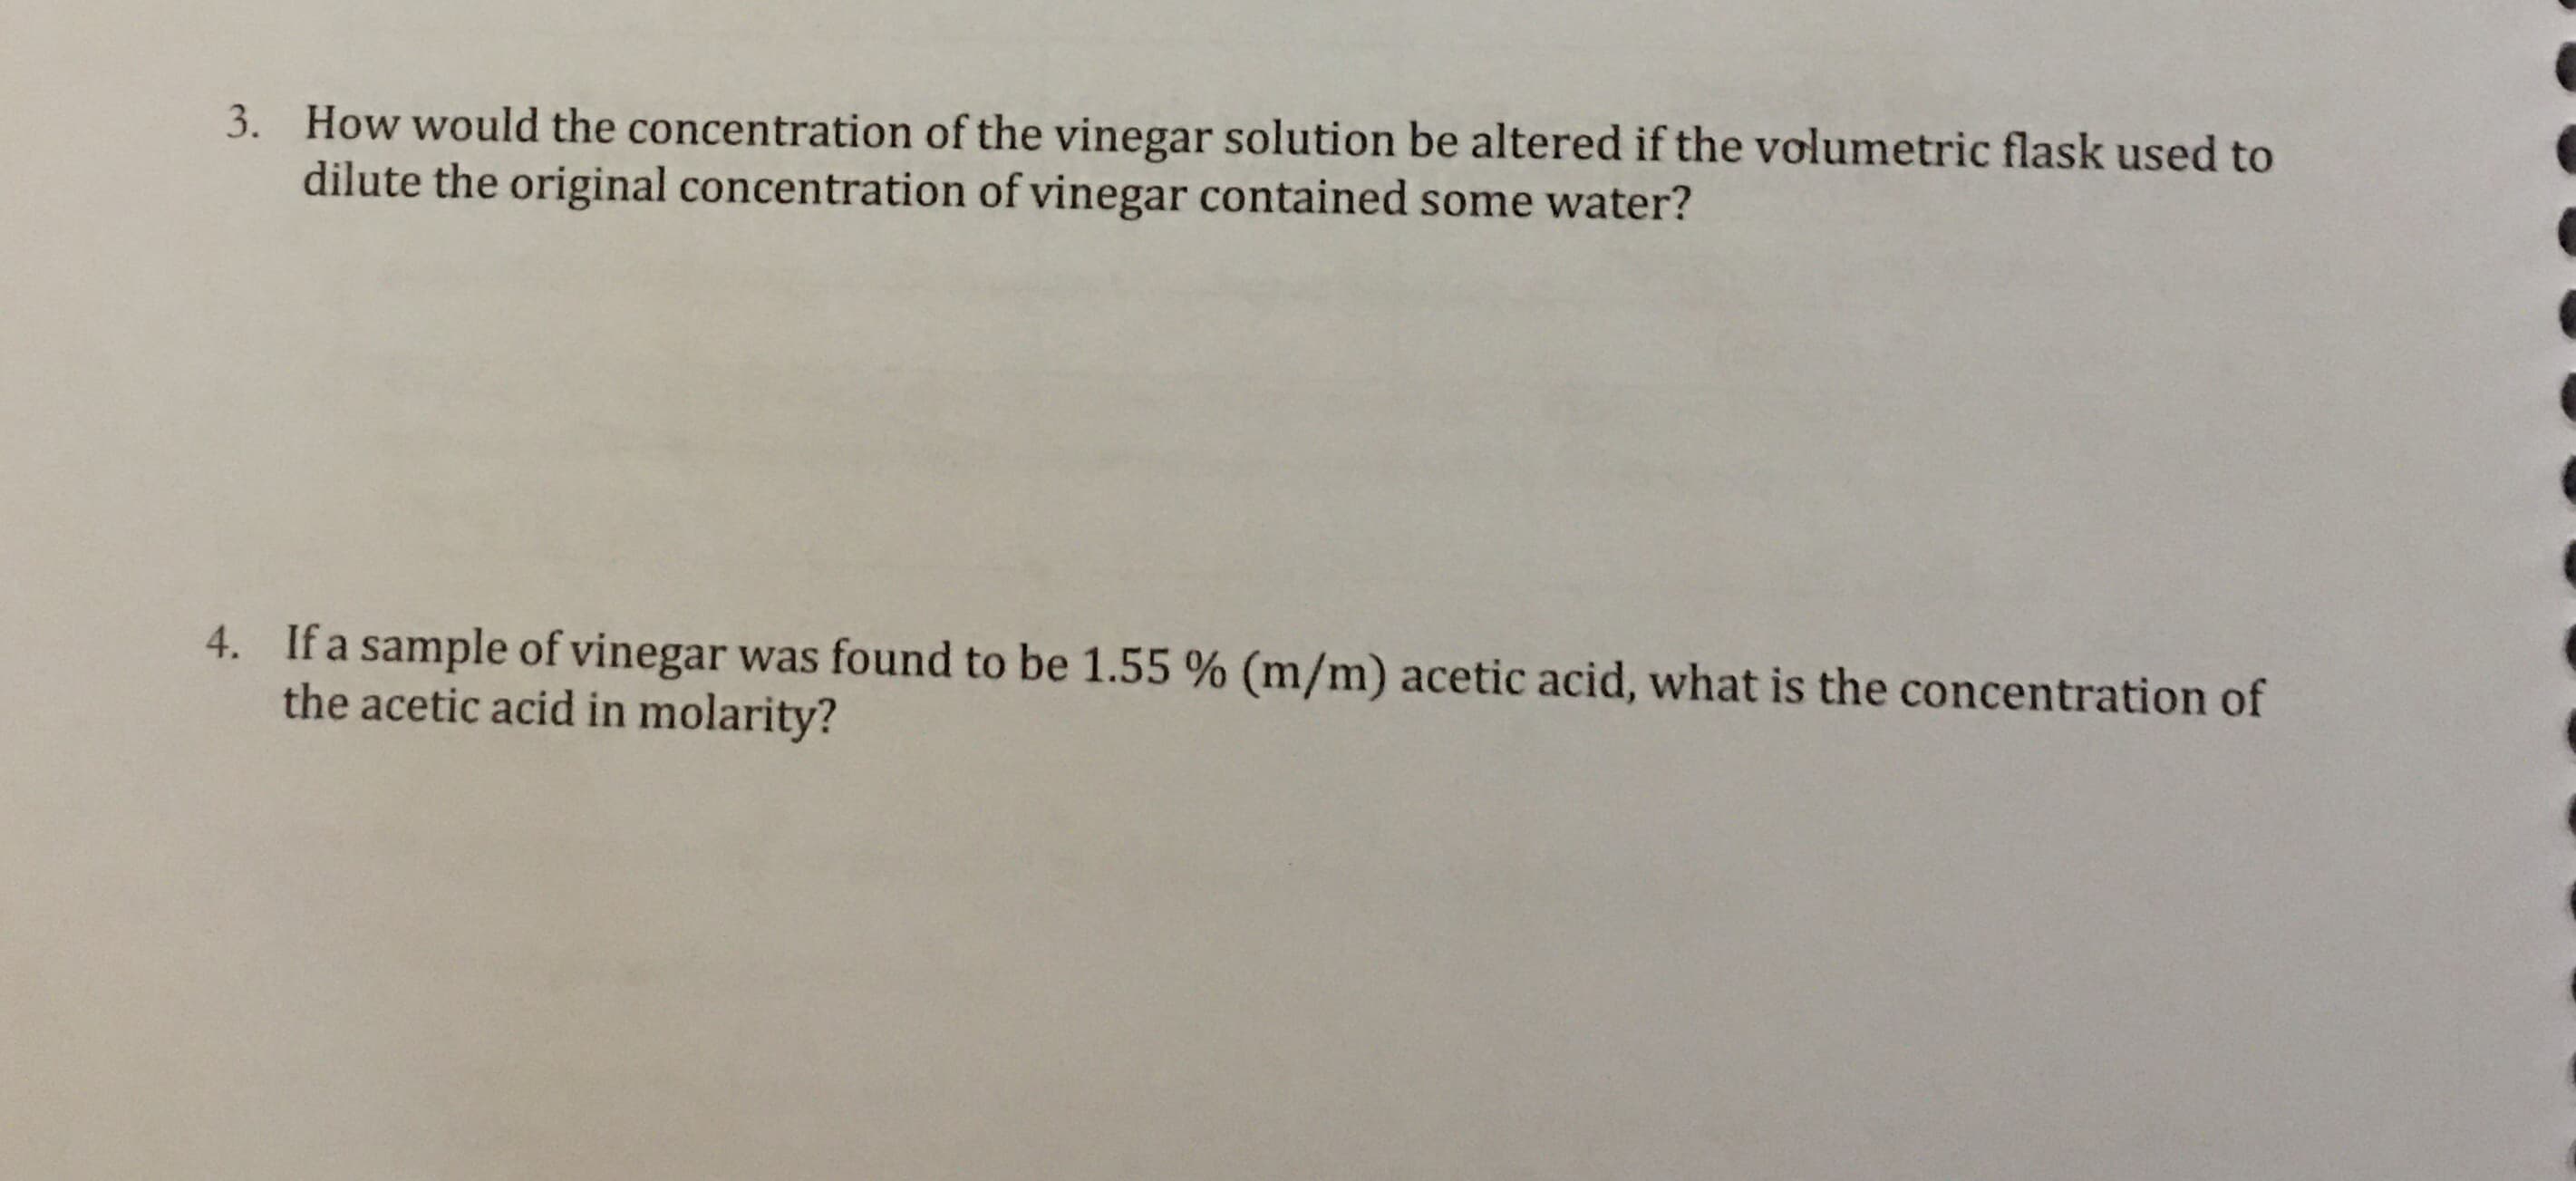 How would the concentration of the vinegar solution be altered if the volumetric flask used to
dilute the original concentration of vinegar contained some water?
3.
If a sample of vinegar was found to be 1.55 % (m/m) acetic acid, what is the concentration of
the acetic acid in molarity?
4.
